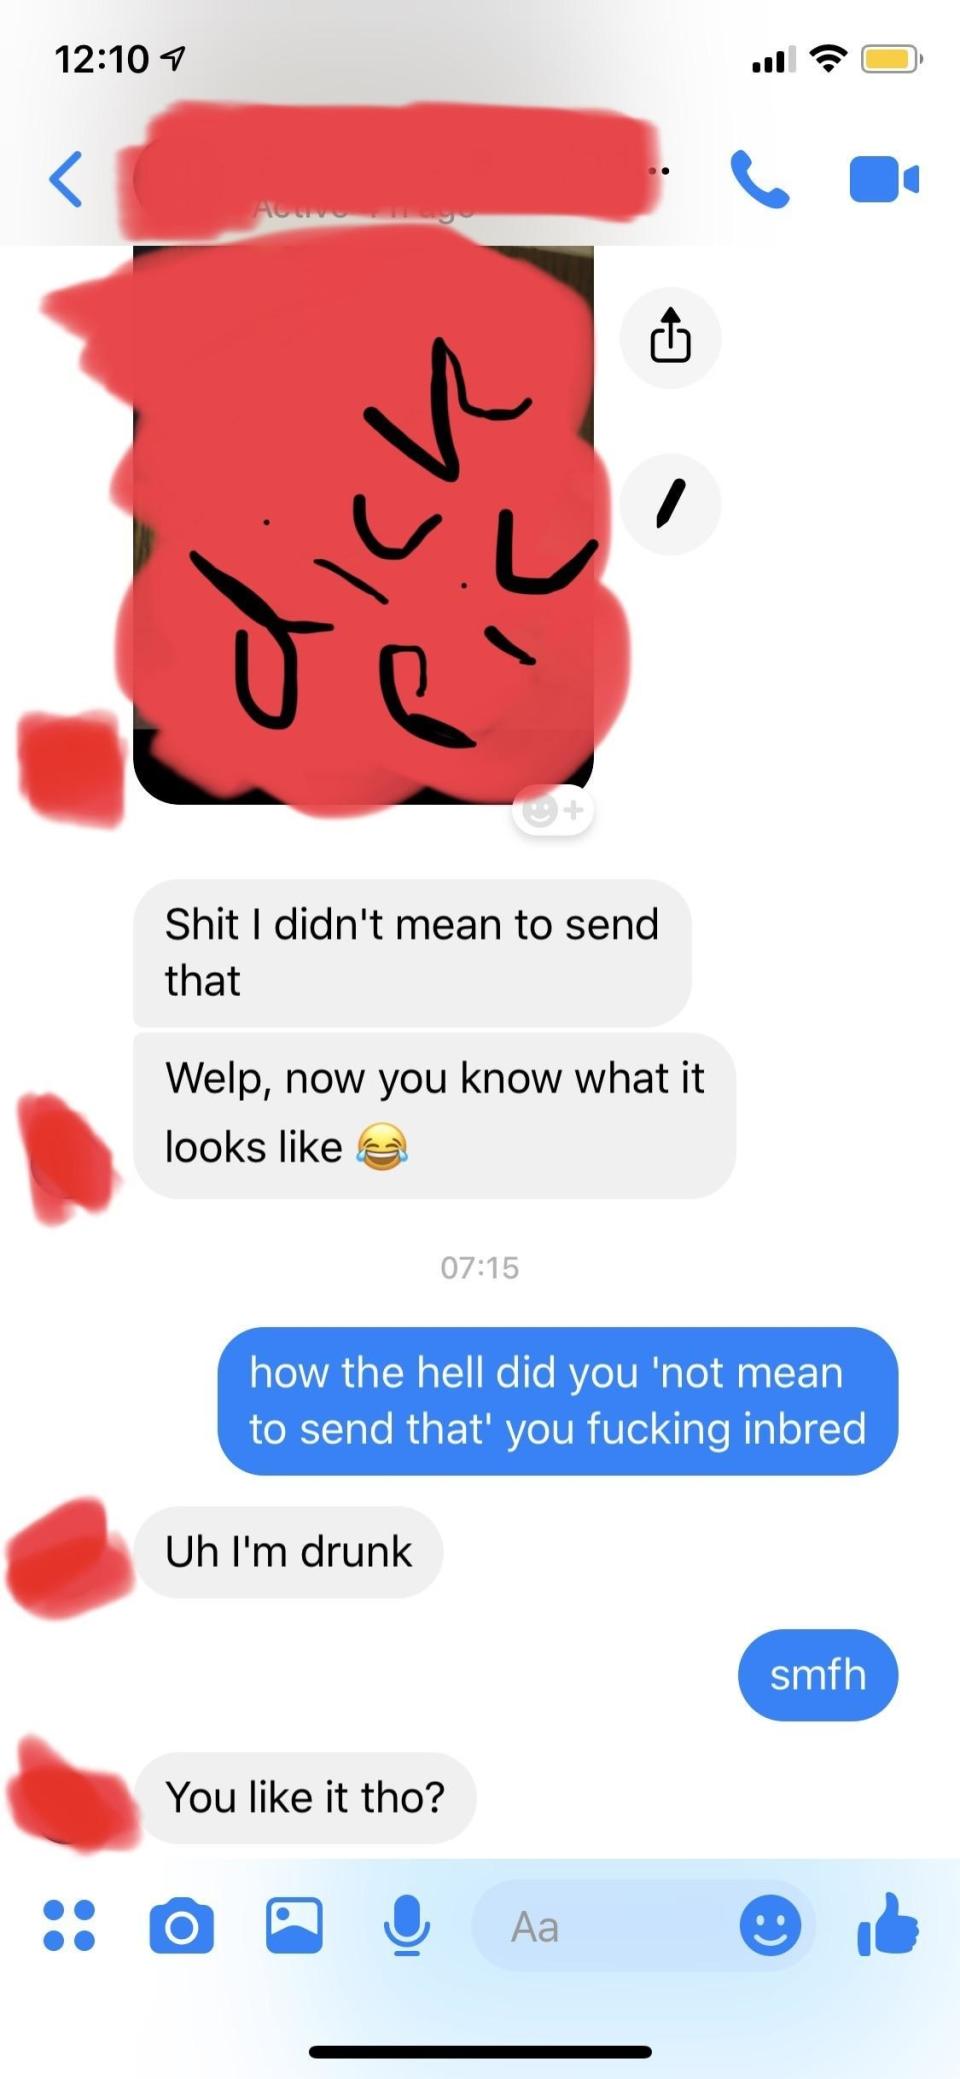 Person says they didn't mean to send the dick pic, and when asked how they didn't mean to send it, they say they're drunk—"You like it though?"